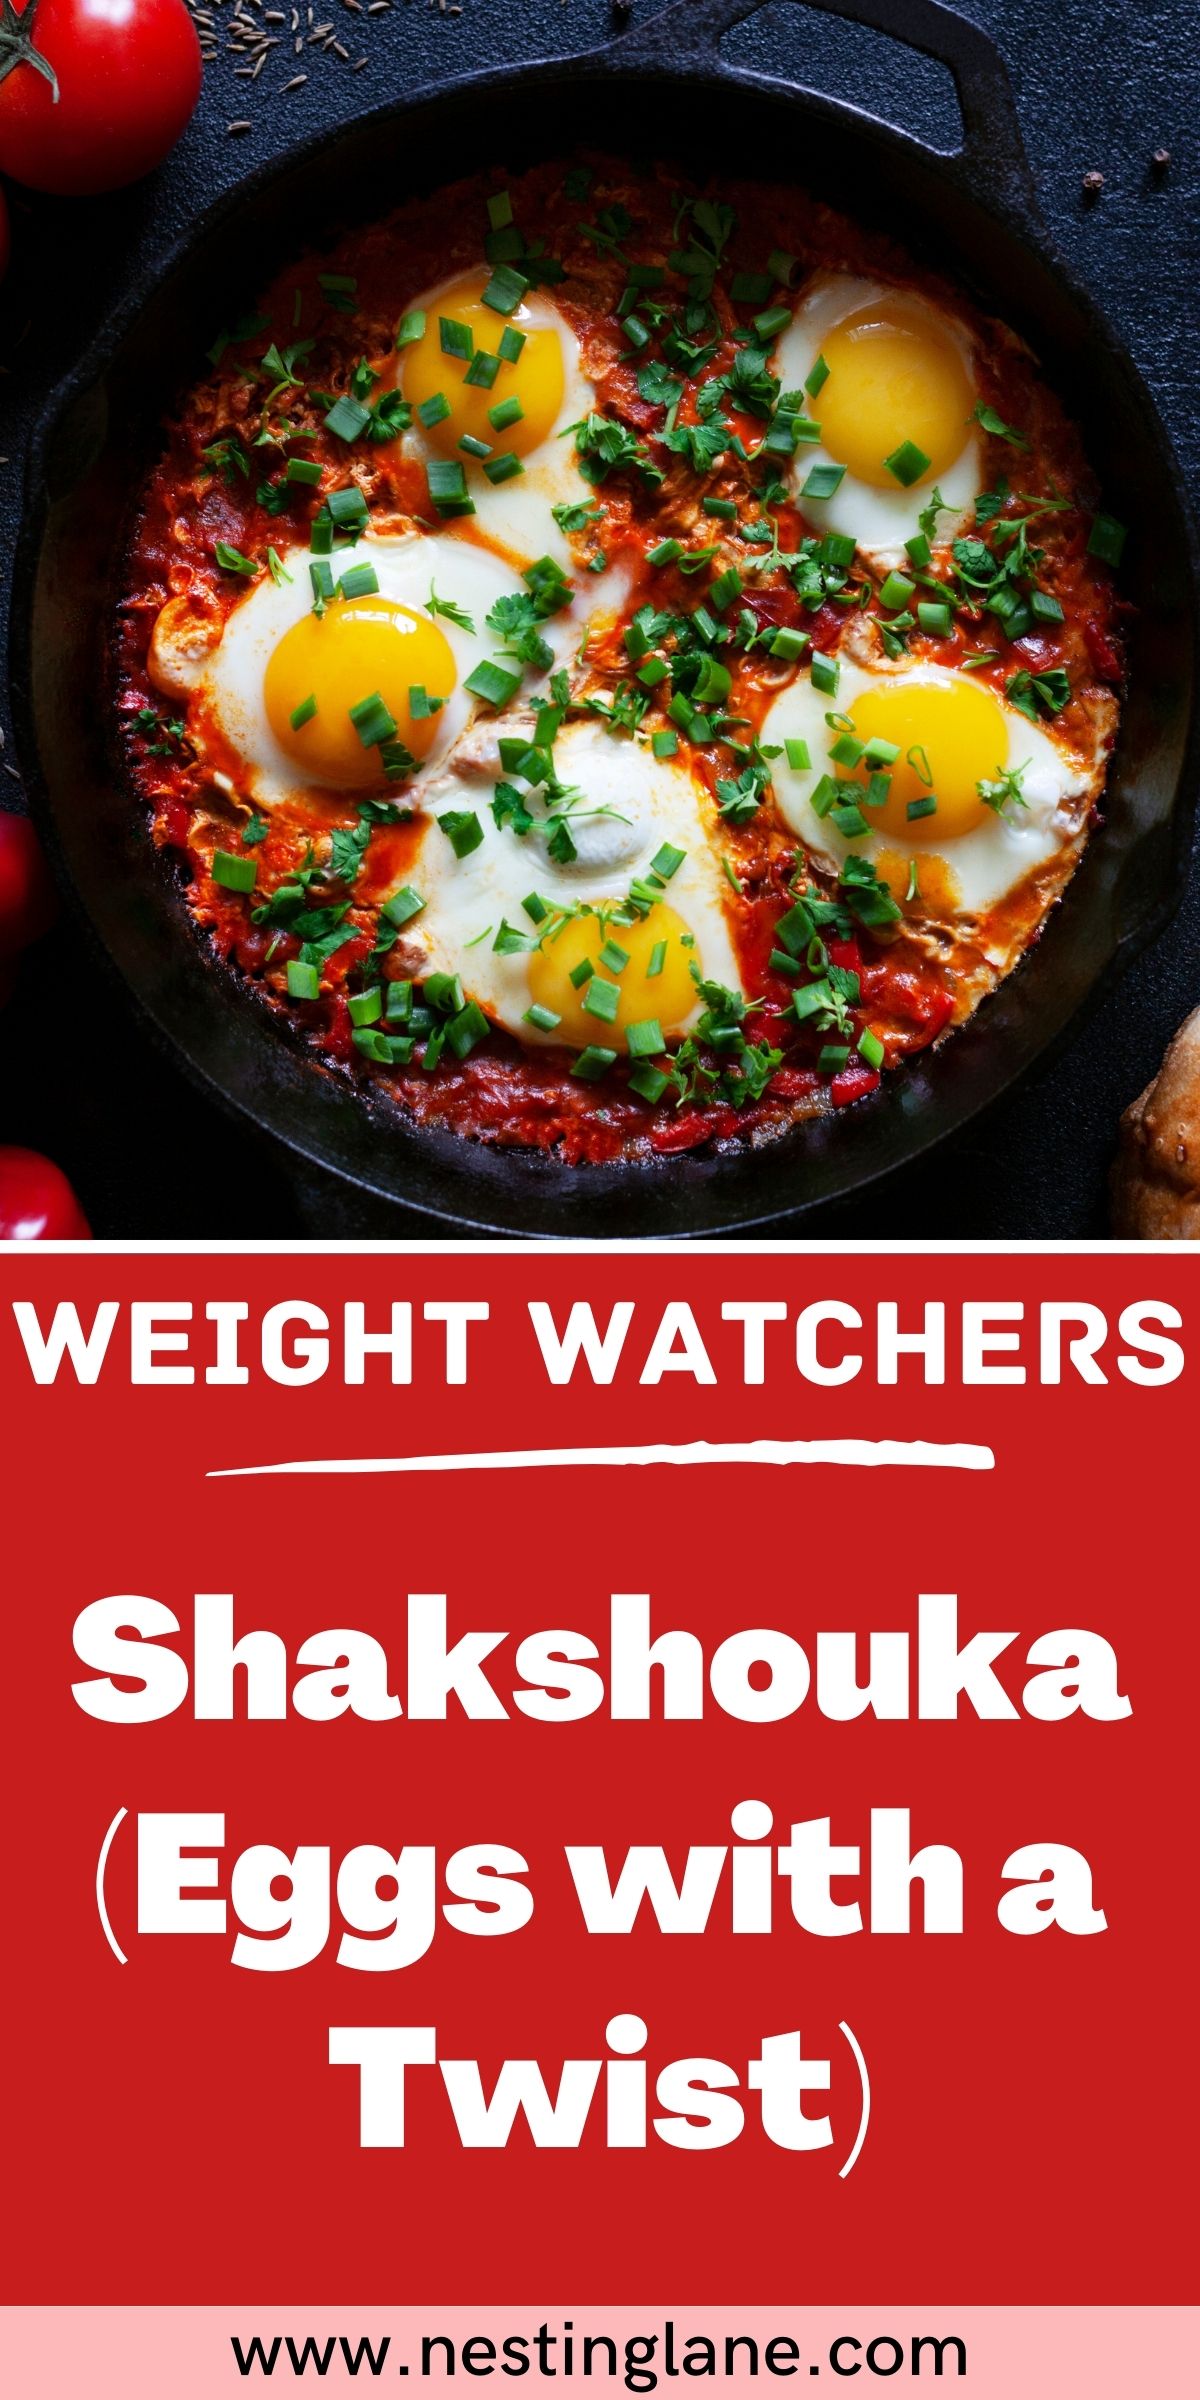 Graphic for Pinterest of Shakshouka (Eggs with a Twist) Recipe.